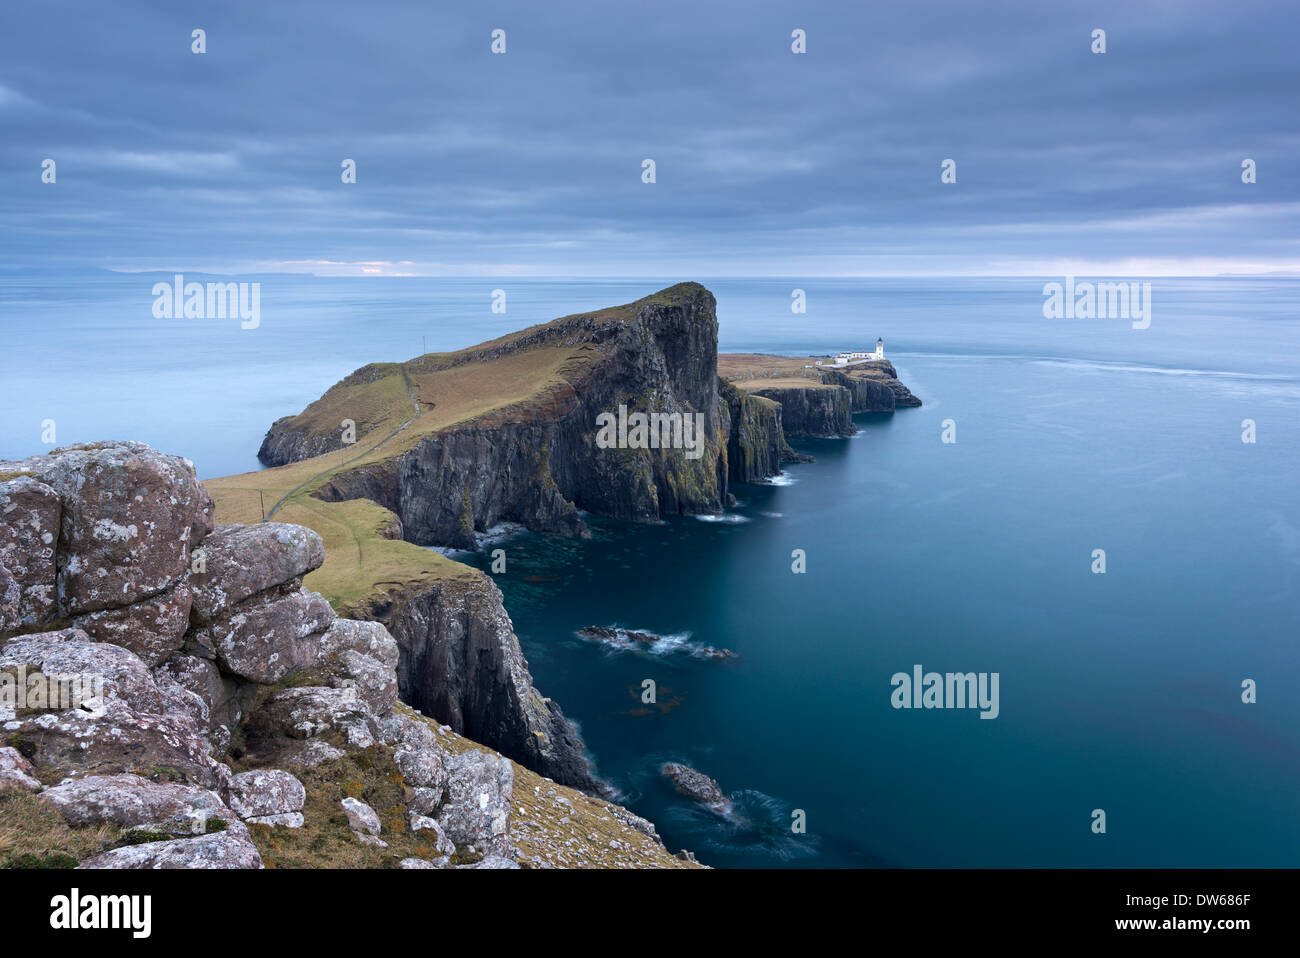 Neist Point, the most westerly point on the Isle of Skye, Inner Hebrides, Scotland. Winter (December) 2013. Stock Photo